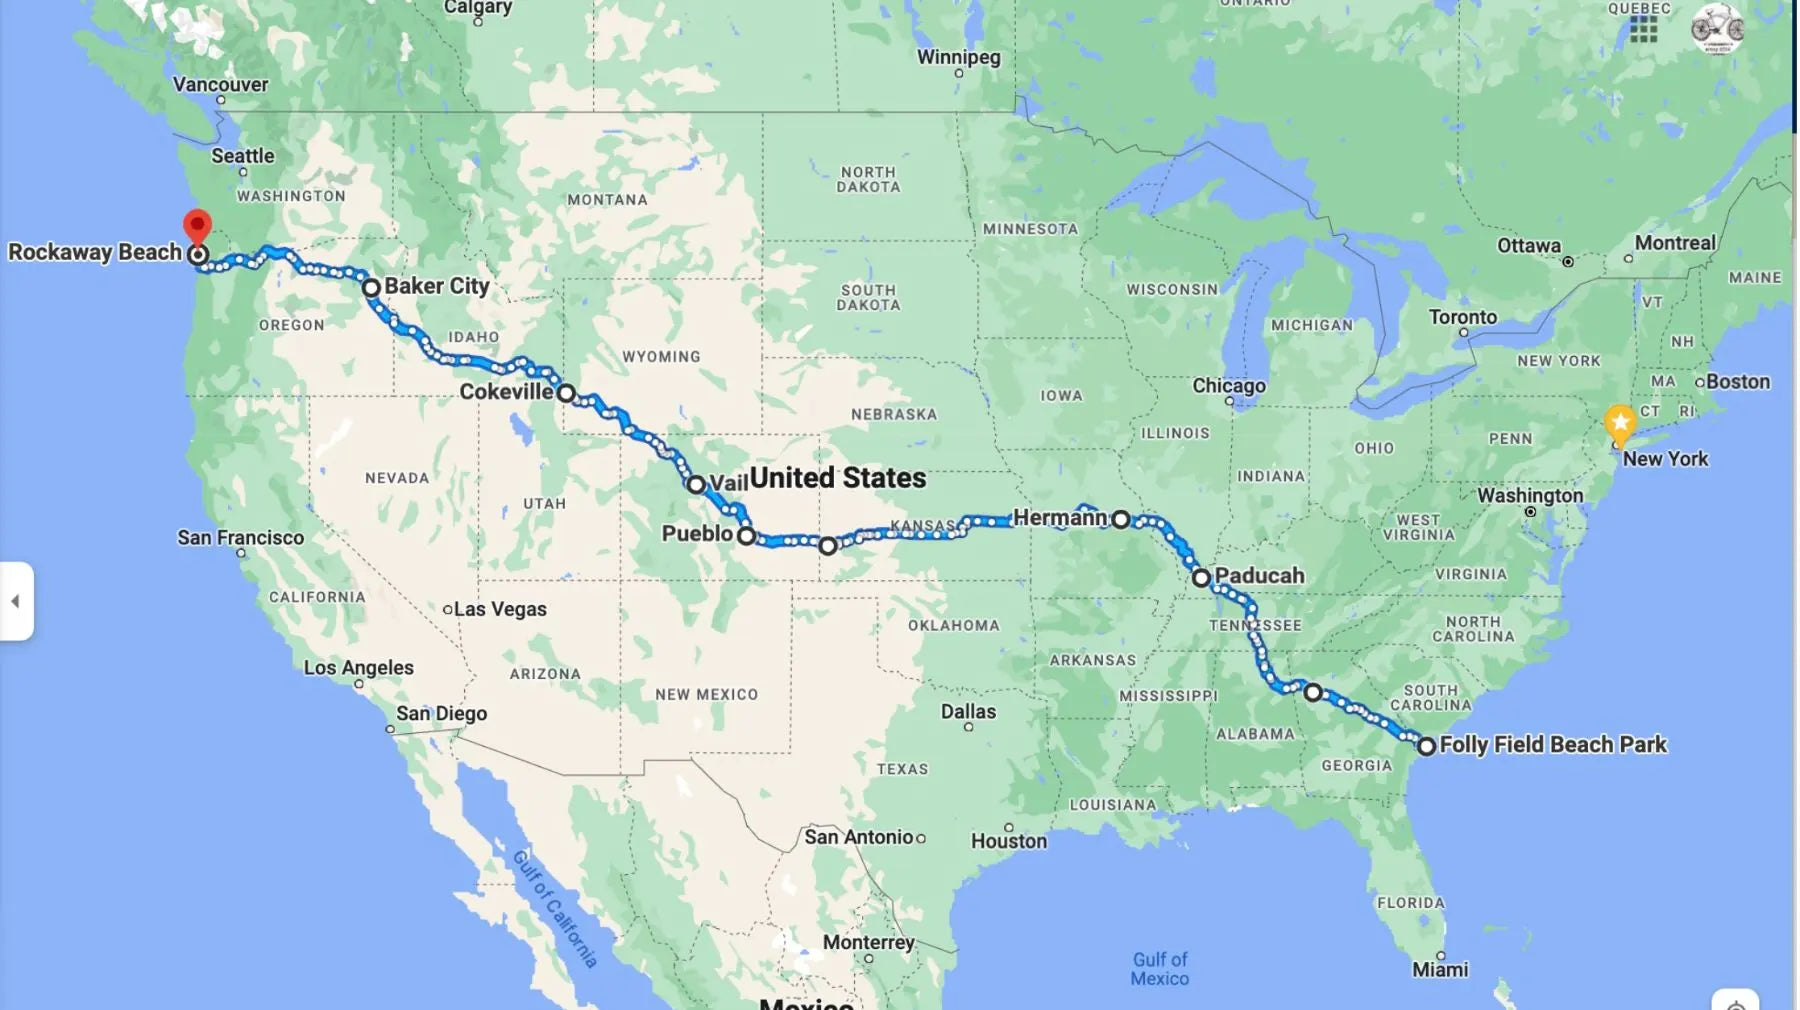 google maps image of the 3800 mile trip across north america